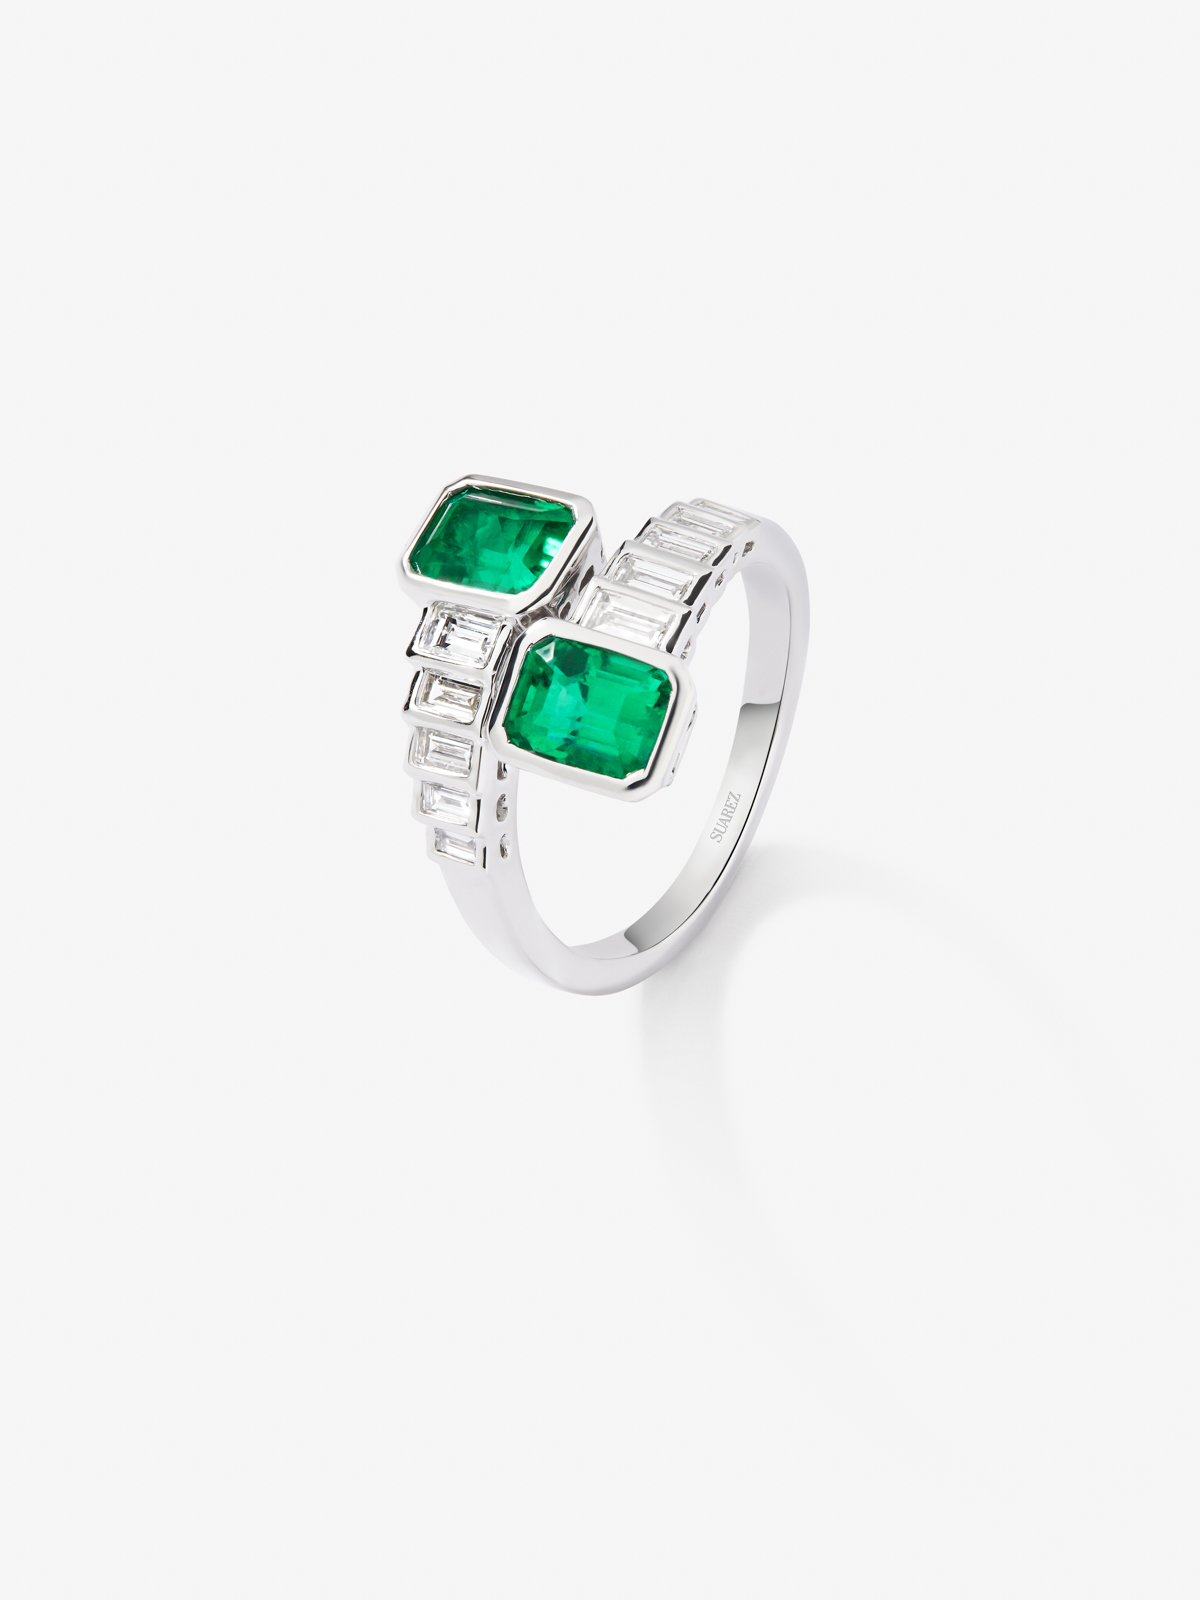 You and I 18k White Gold Ring with Green Emeralds in Octagonal Size 1.7 cts and white diamonds in 0.57 CTS baggos